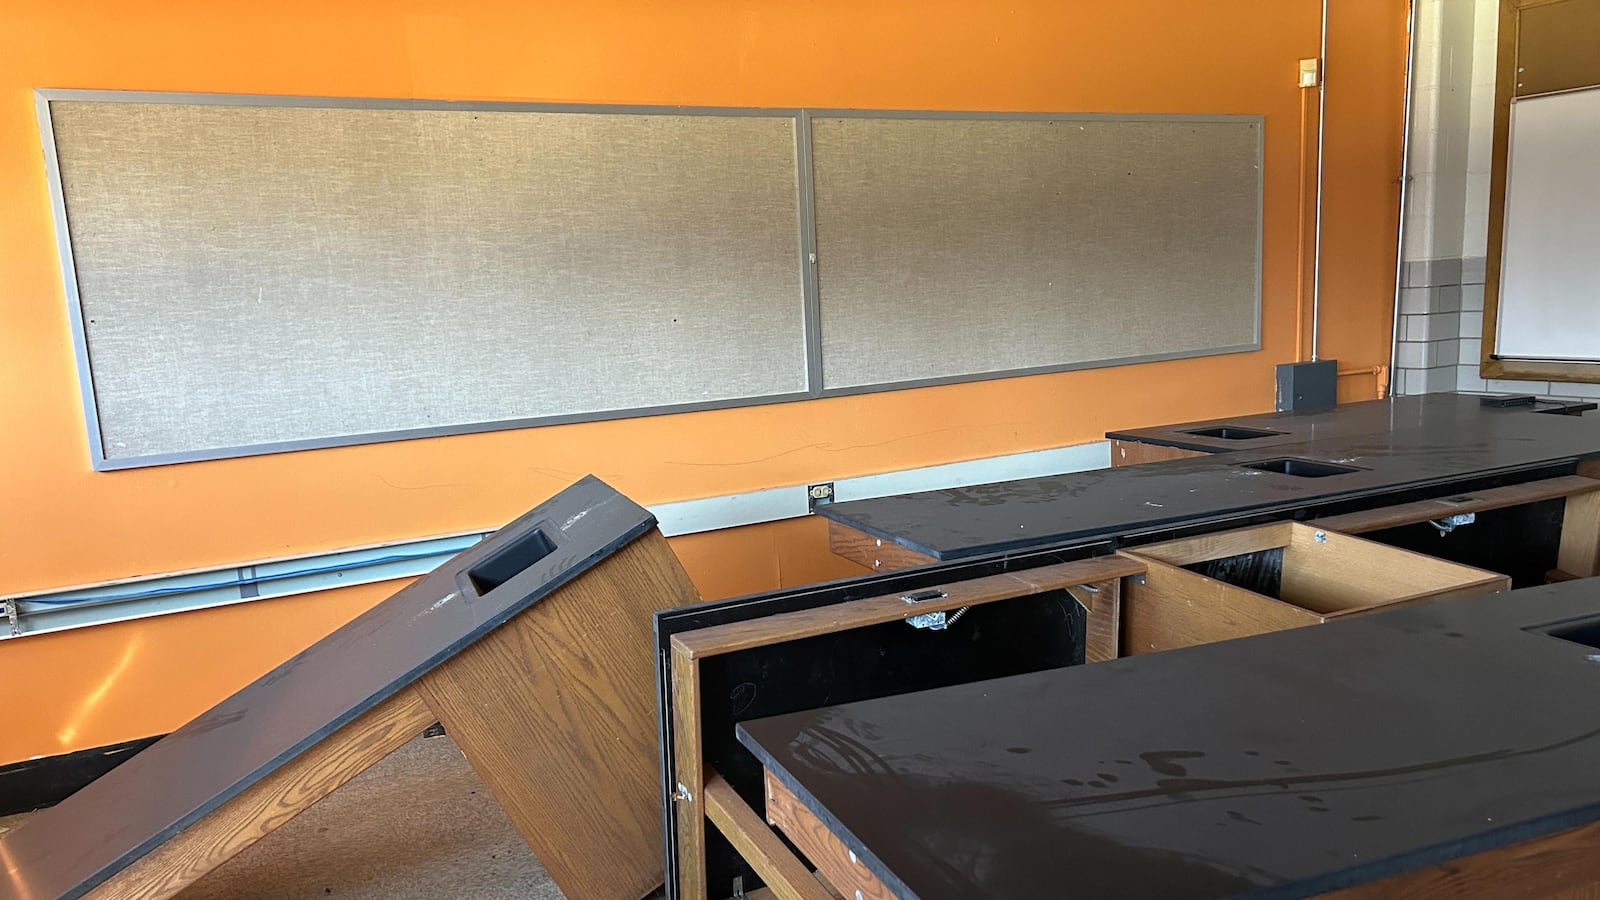 An empty classroom with a bright orange wall in the background.